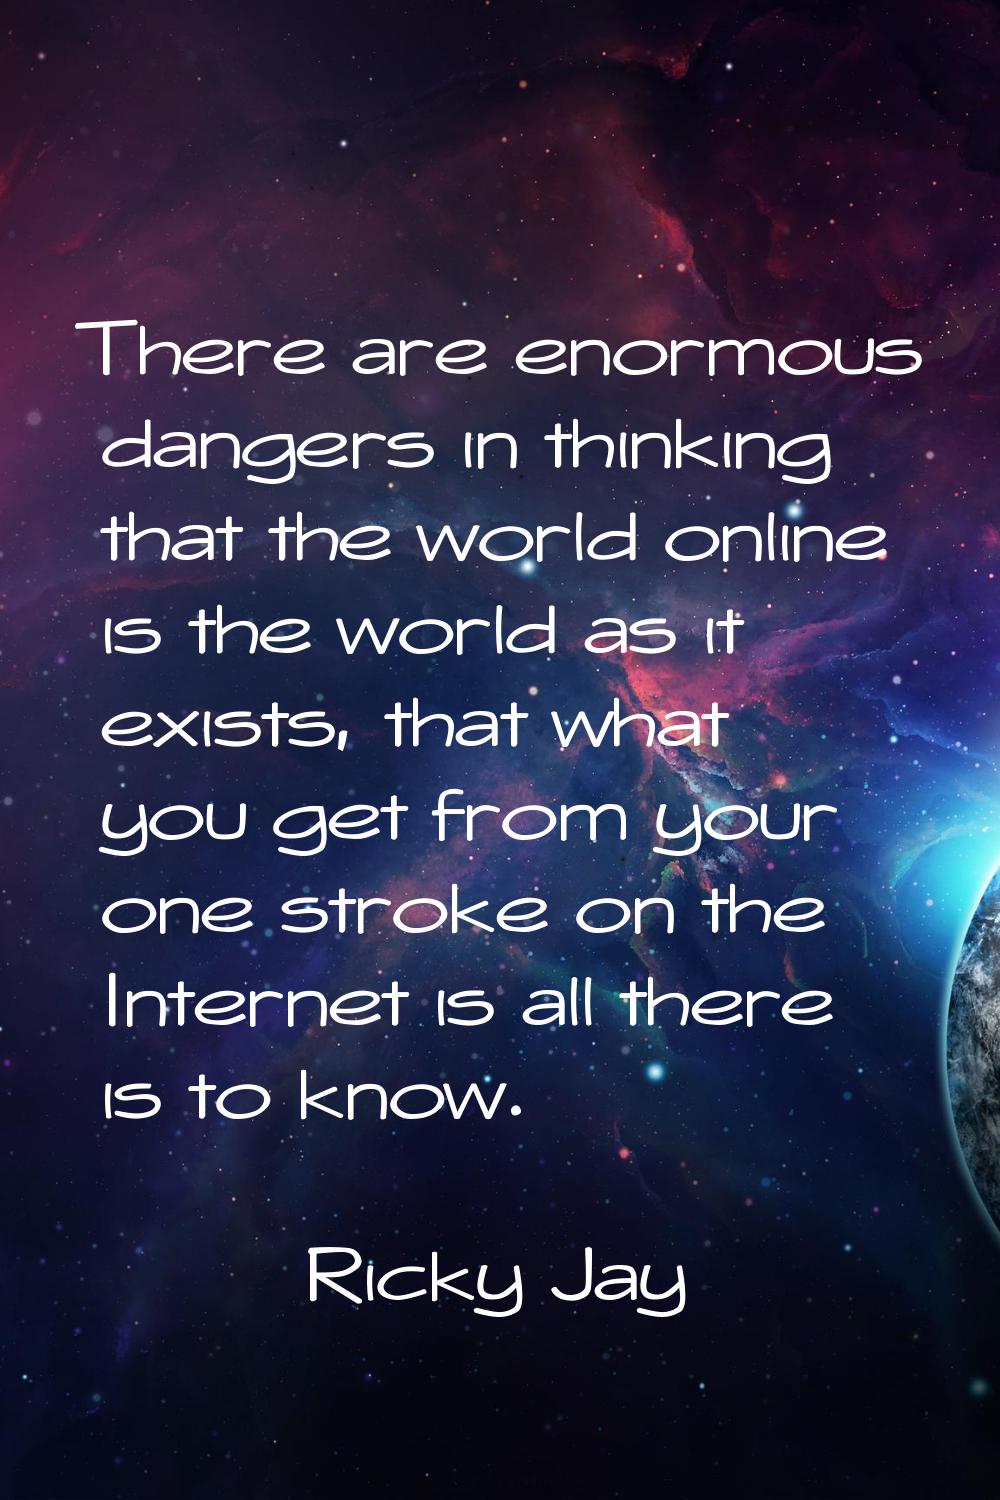 There are enormous dangers in thinking that the world online is the world as it exists, that what y